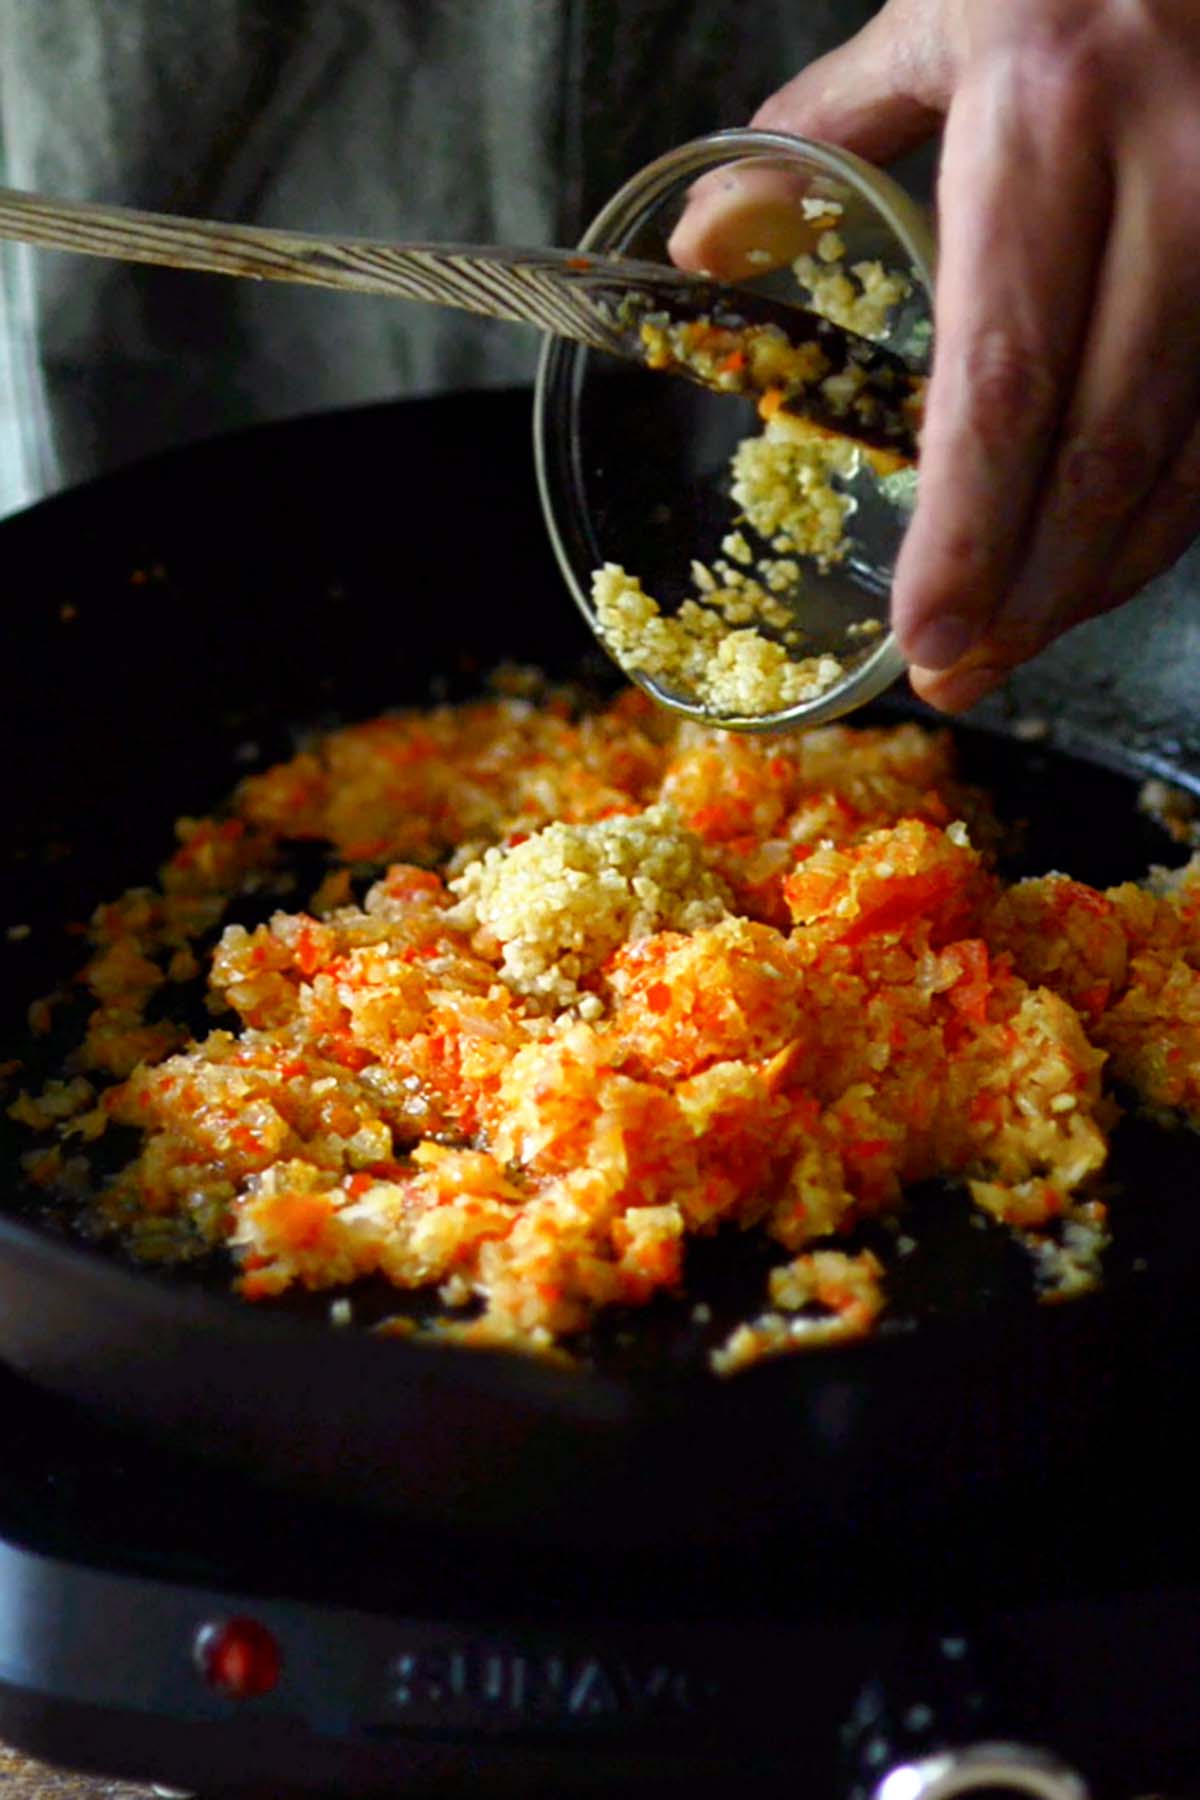 Minced vegetables and garlic being added to a cast iron skillet.